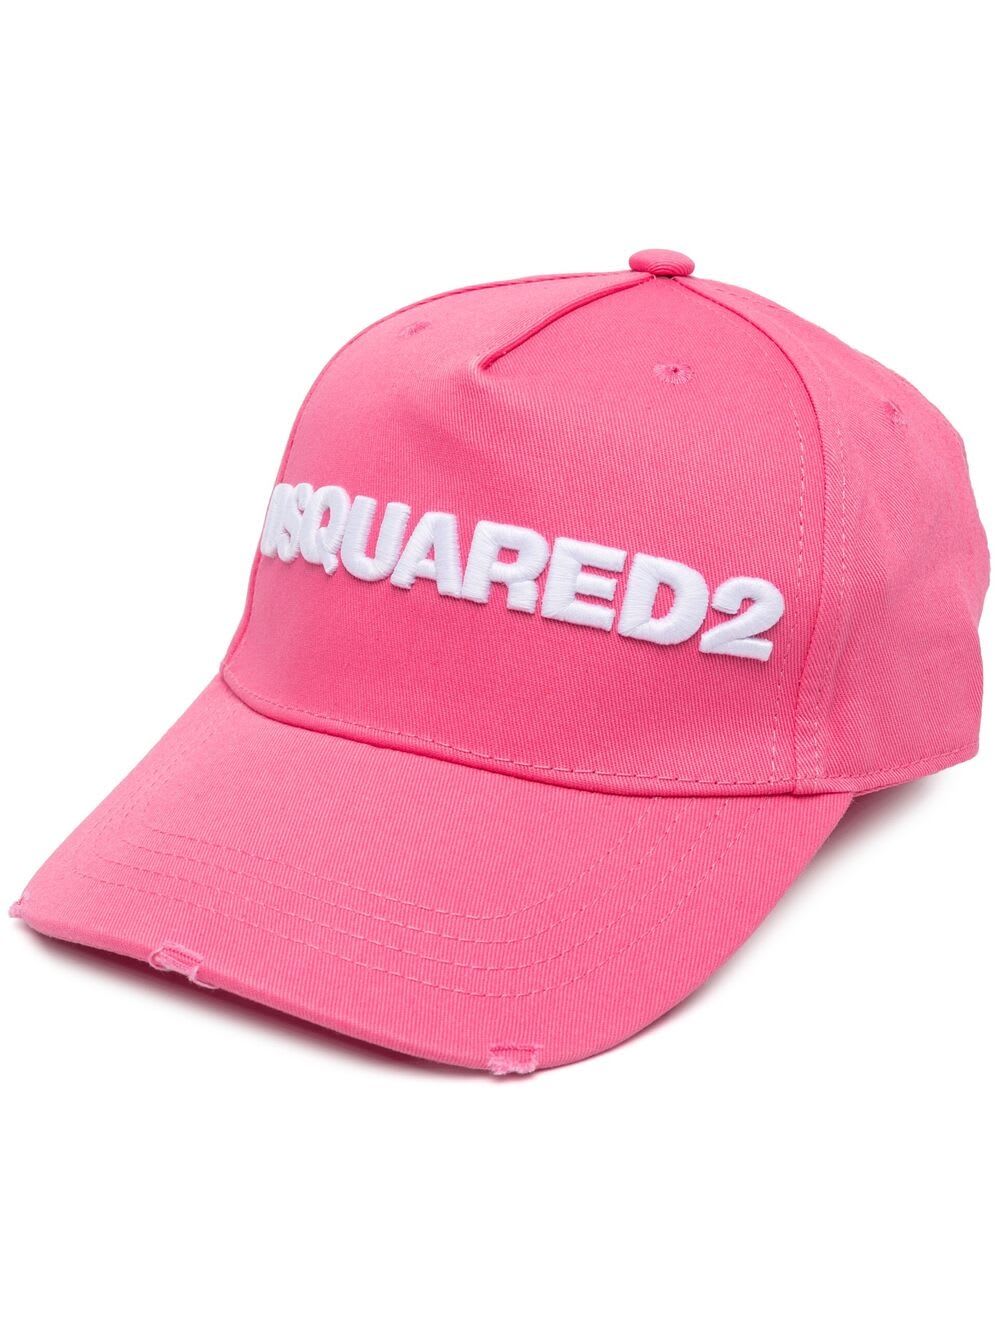 Dsquared2 Woman Pink Baseball Cap With White Embroidered Logo